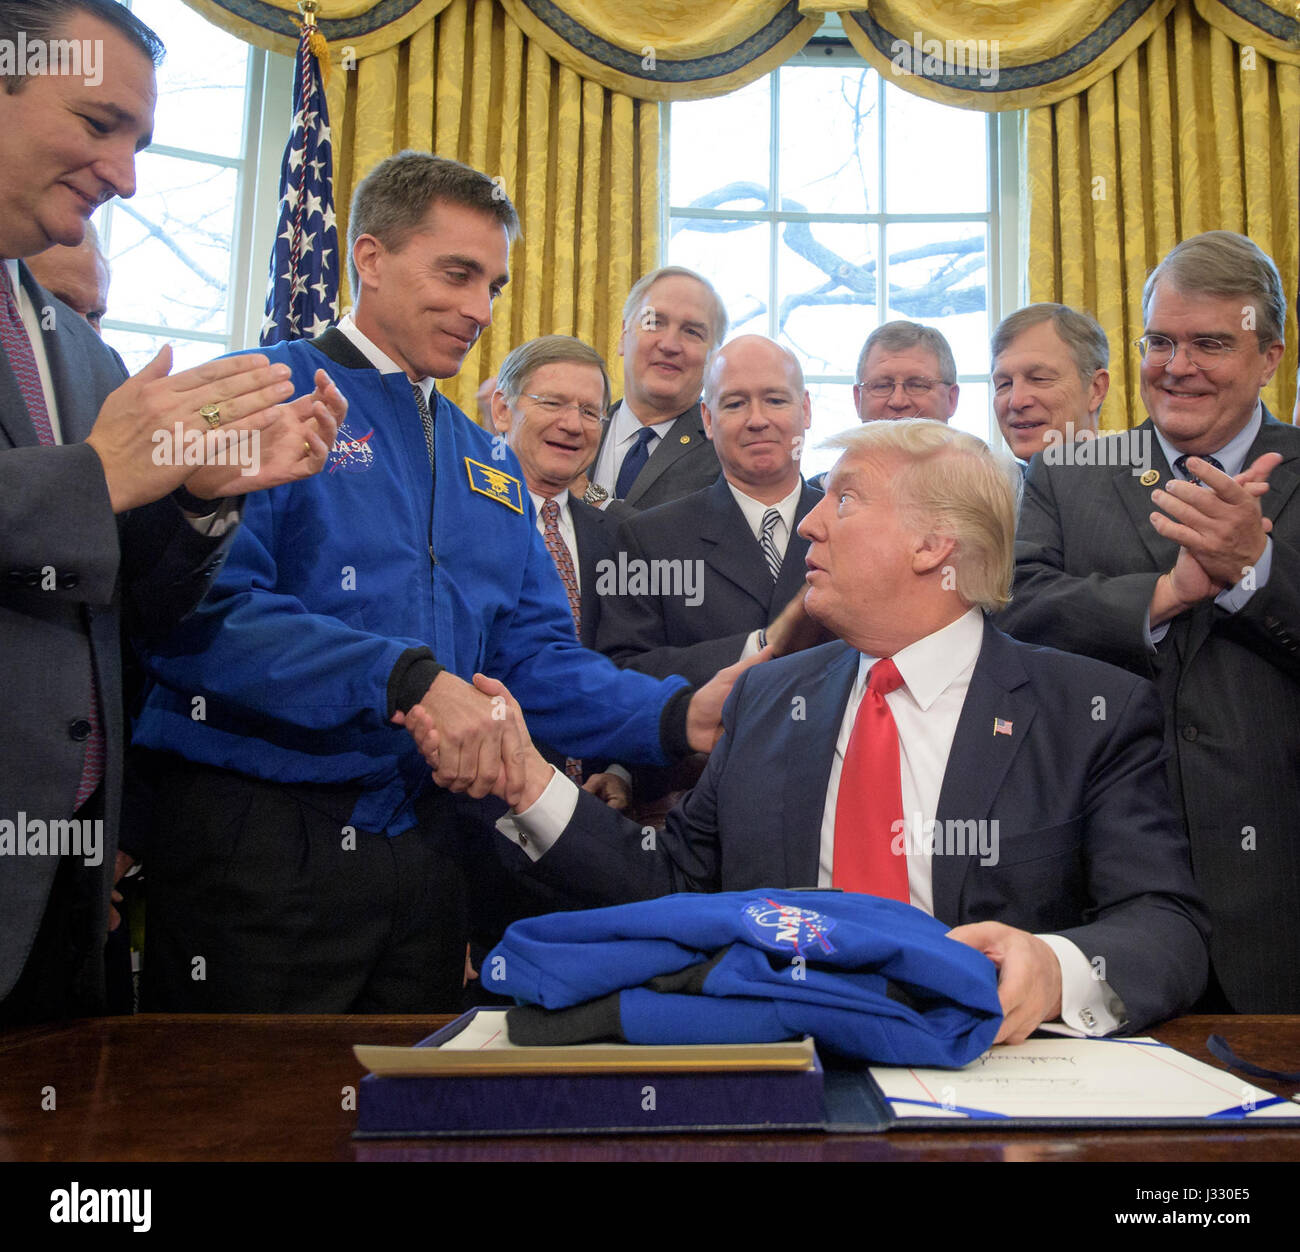 President Donald Trump, seated, shakes hands with NASA Astronaut Office Chief Chris Cassidy, after signing the NASA Transition Authorization Act of 2017, alongside members of the Senate, Congress, and National Aeronautics and Space Administration in the Oval Office of the White House in Washington, Tuesday, March 21, 2017.  Also pictured, from left, Sen. Ted Cruz, R-Texas, NASA Astronaut Office Chief Chris Cassidy, Rep. Lamar Smith, R-Texas, Sen. Luther Strange, R-AL, Rep. Robert Aderholt, R-AL, Rep. Frank Lucas, R-OK, Rep. Brian Babin, R-Texas, and Rep. John Culberson, R-Texas. Photo Credit:  Stock Photo